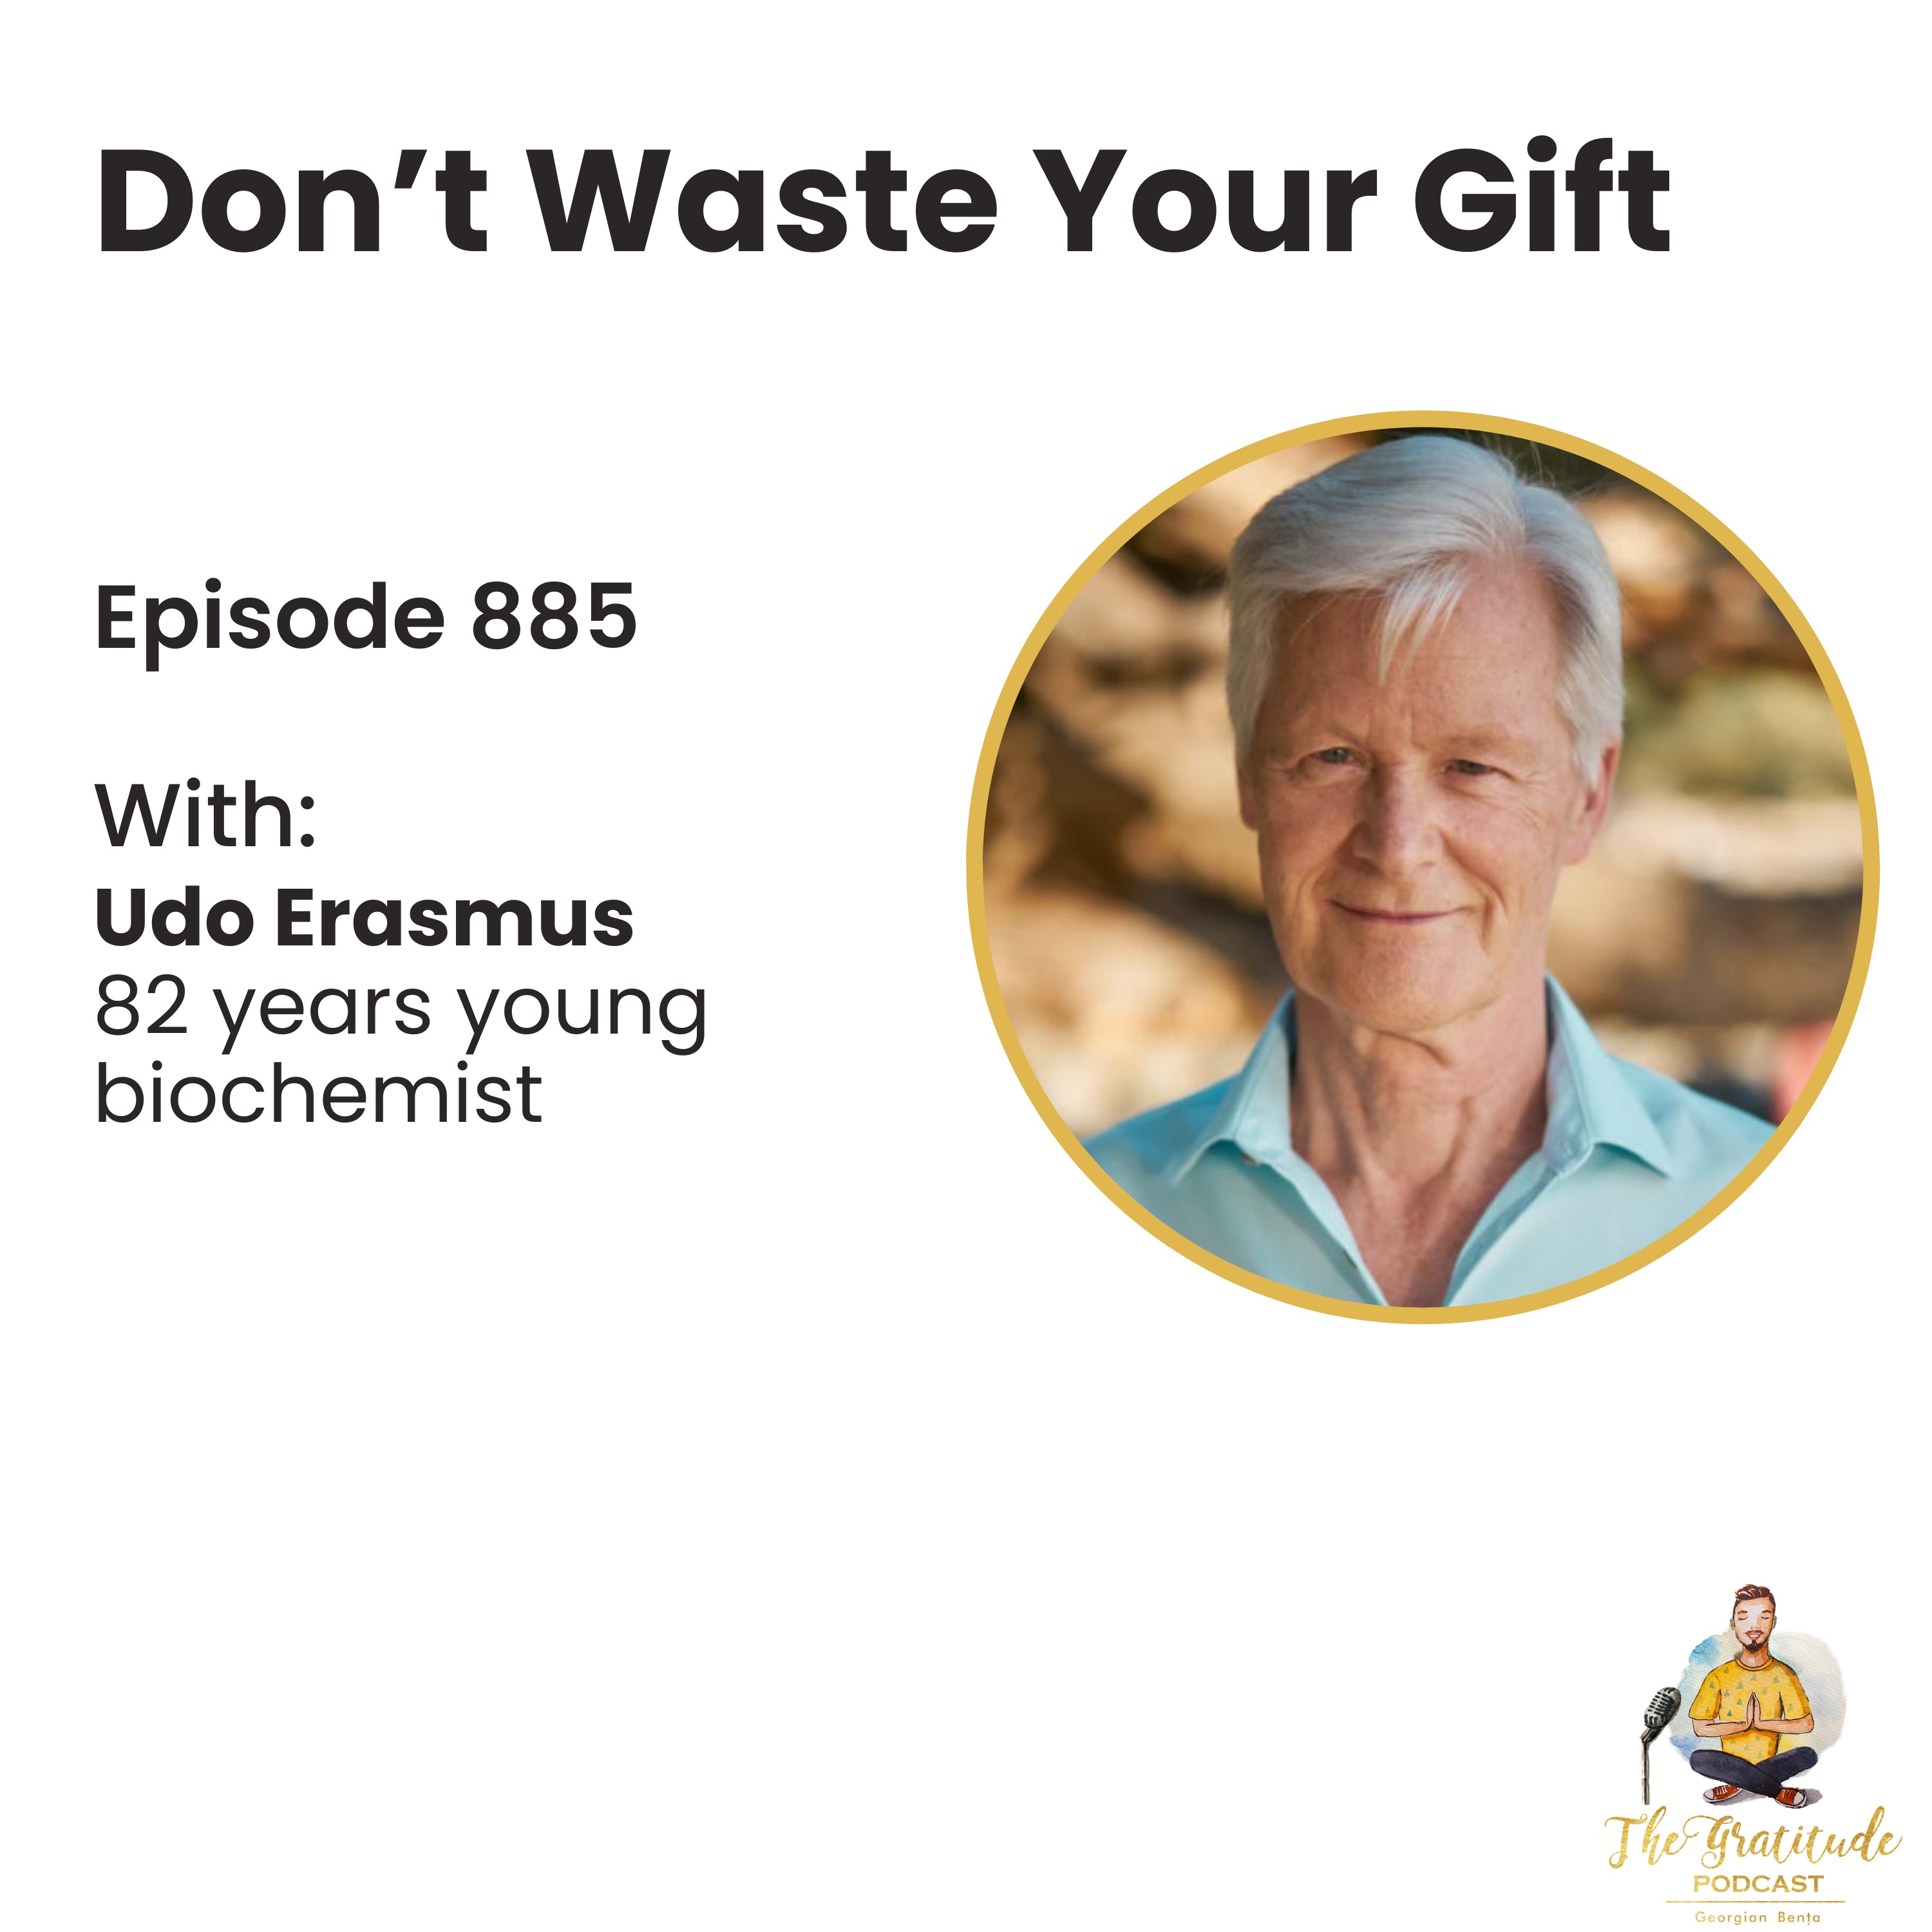 Don't Waste Your Gift - Udo Erasmus (ep. 885)